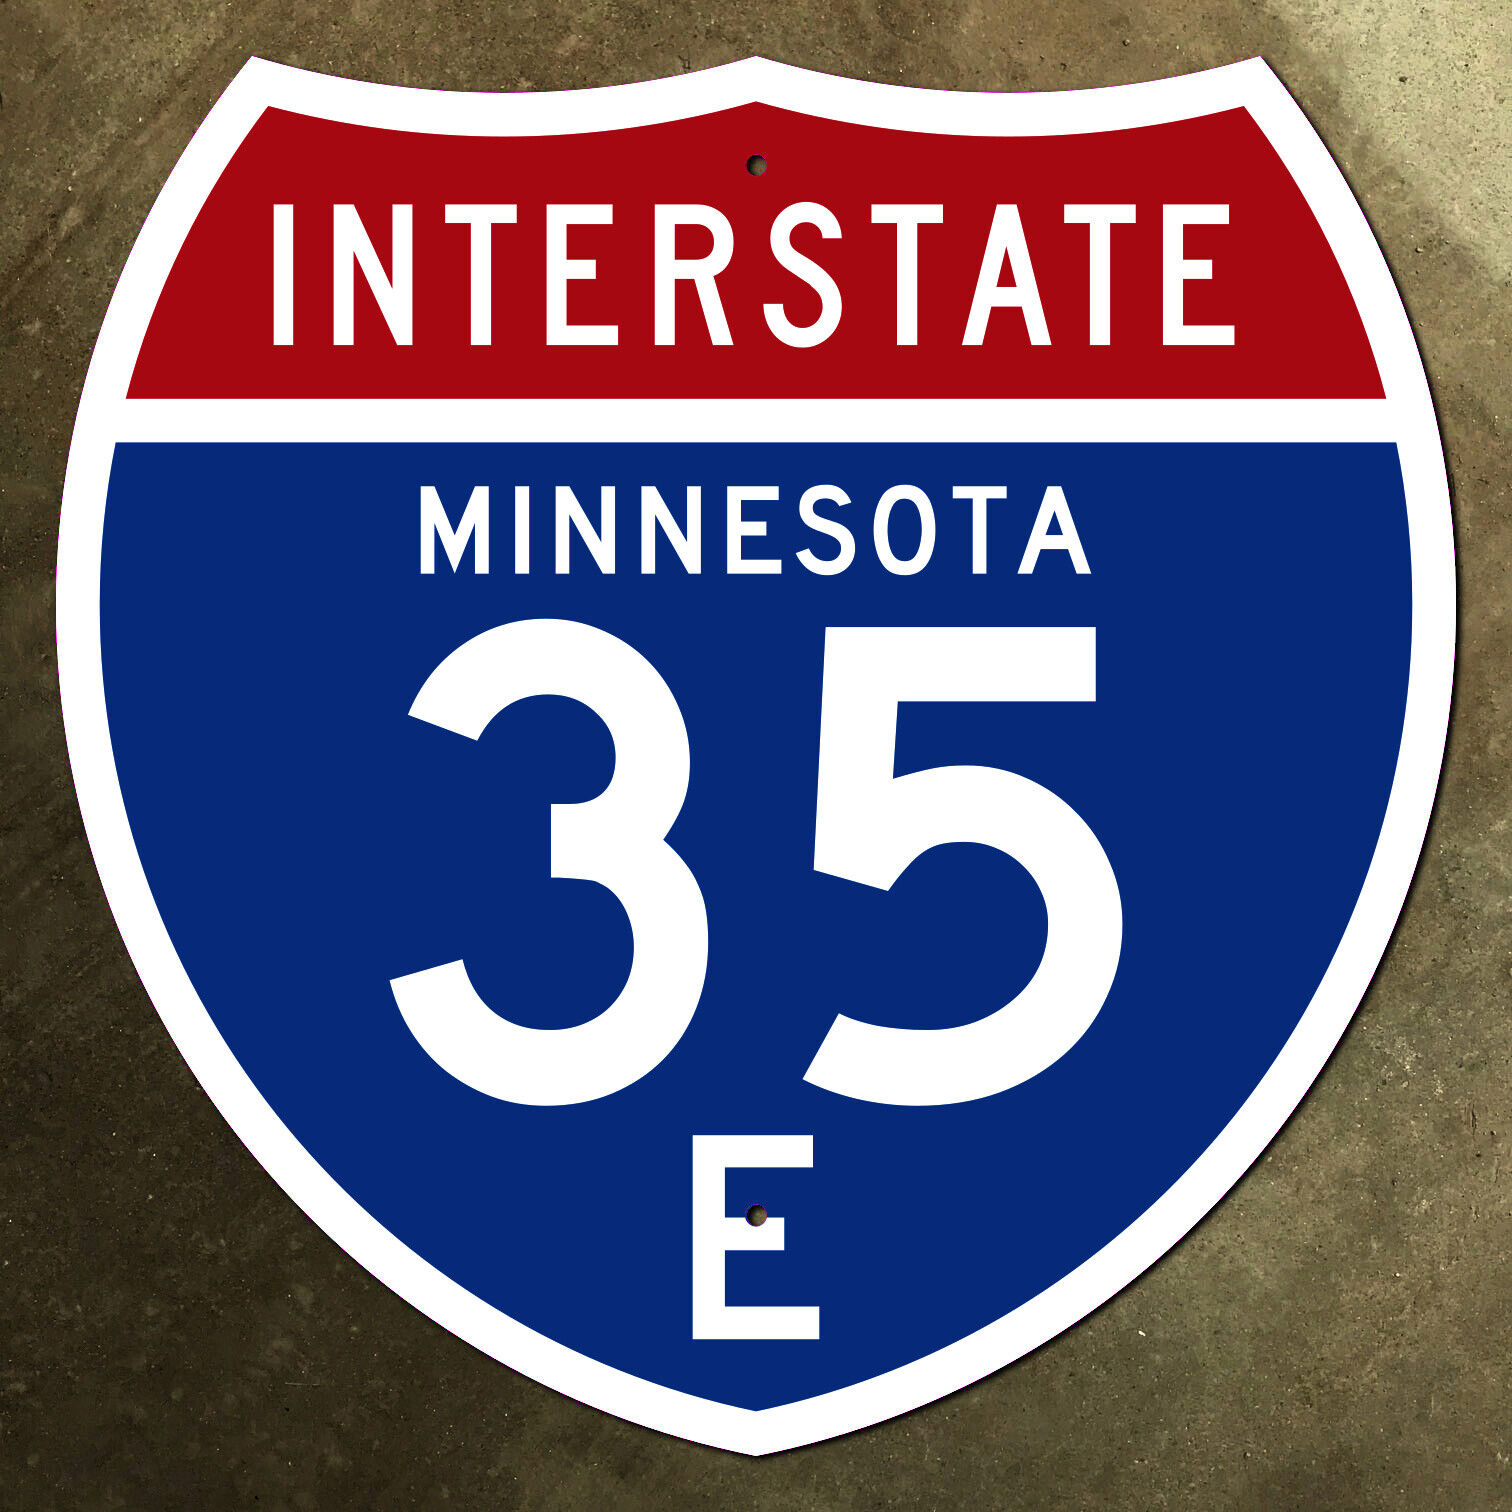 Minnesota interstate route 35E highway marker road sign 18x18 St. Paul suffix